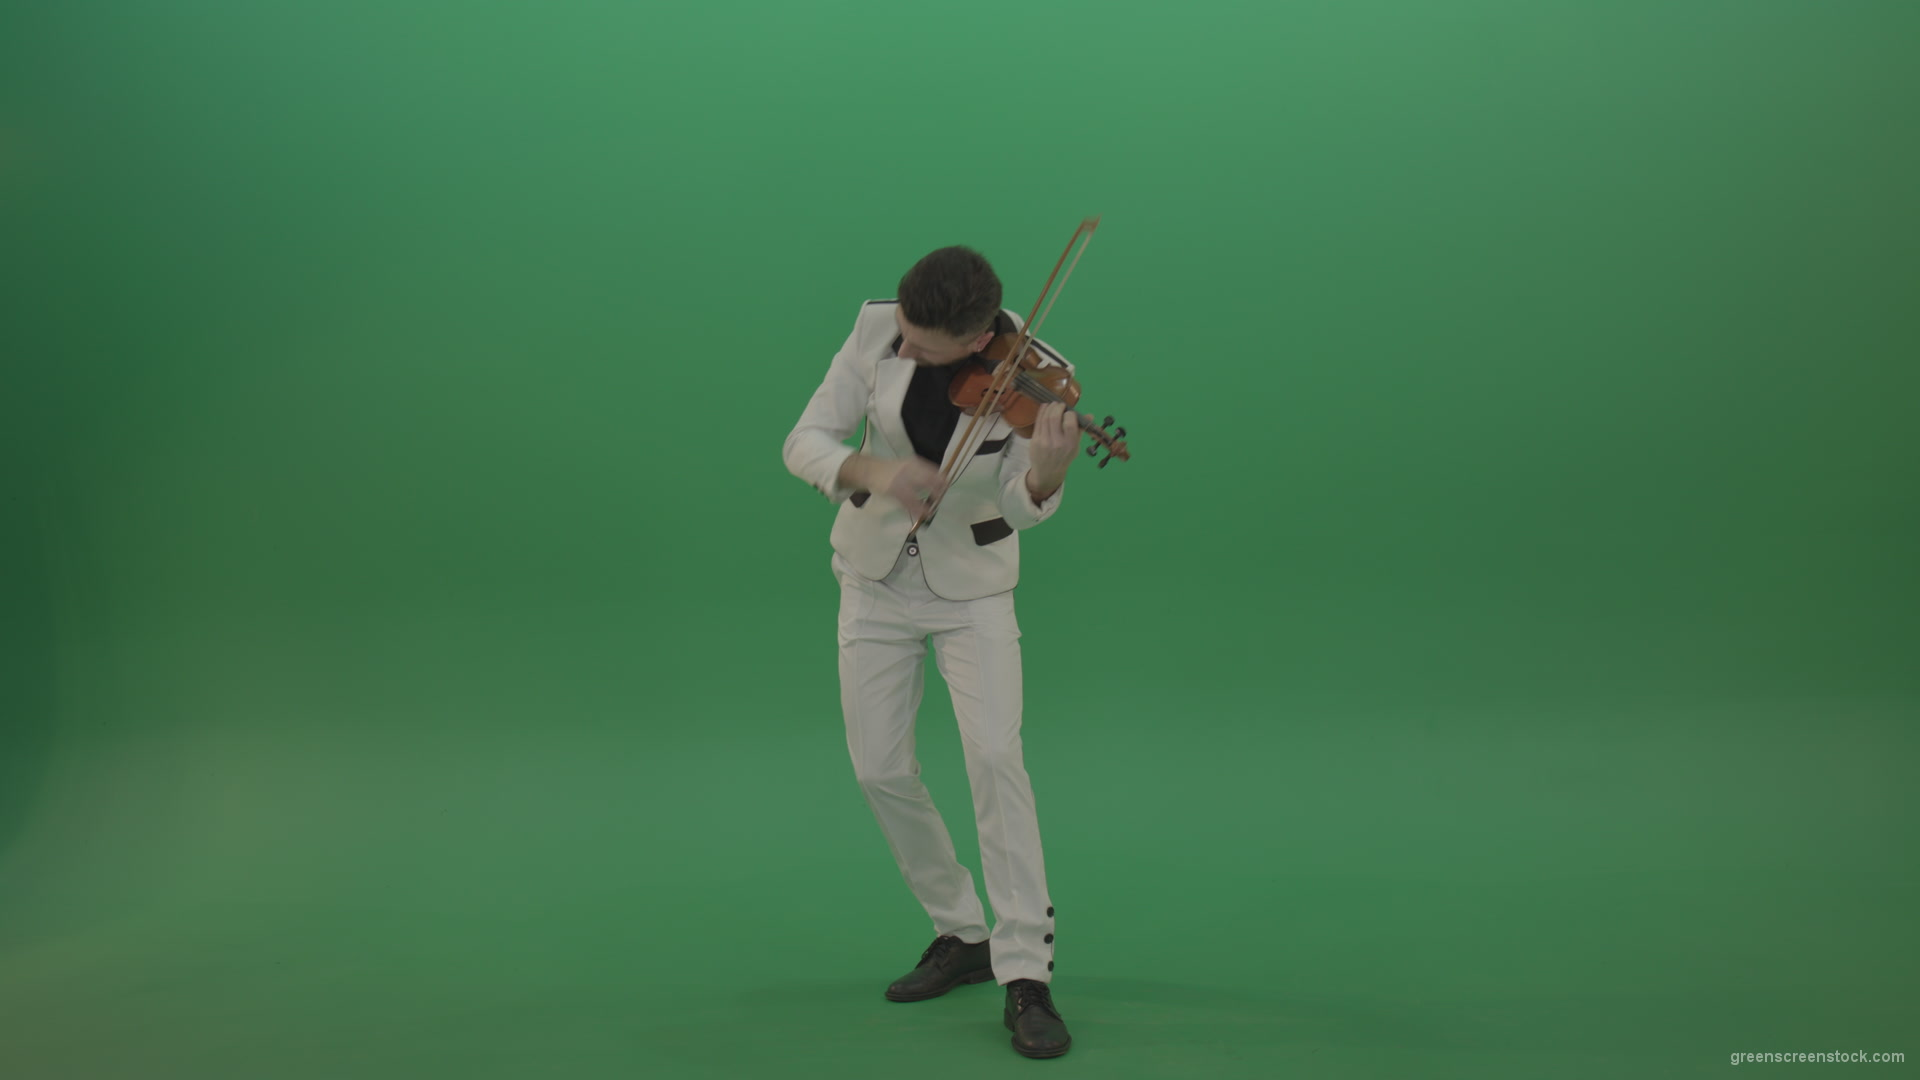 Classic-music-Man-in-white-costume-and-eyes-in-black-mask-play-gothic-violin-Fiddle-string-music-instrument-isolated-on-green-screen_006 Green Screen Stock